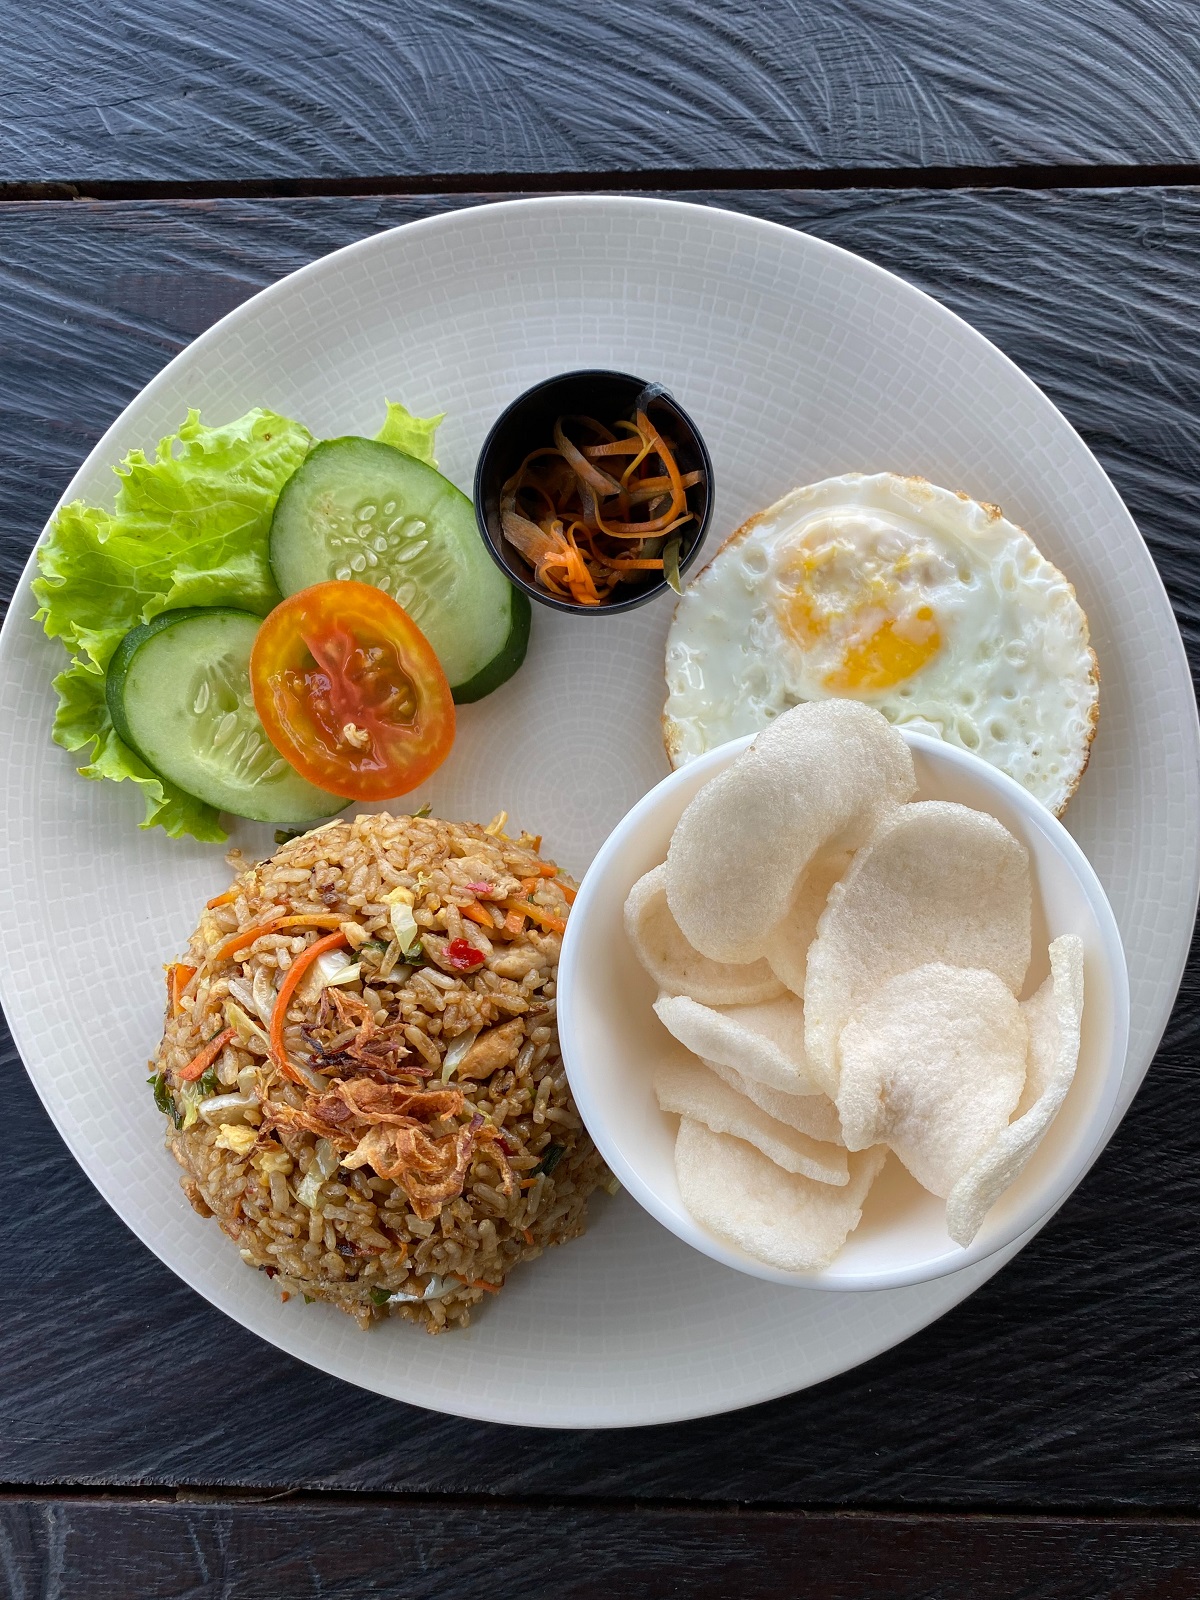 Nasi goreng, a rice dish with vegetables, a fried egg, and fresh cucumber